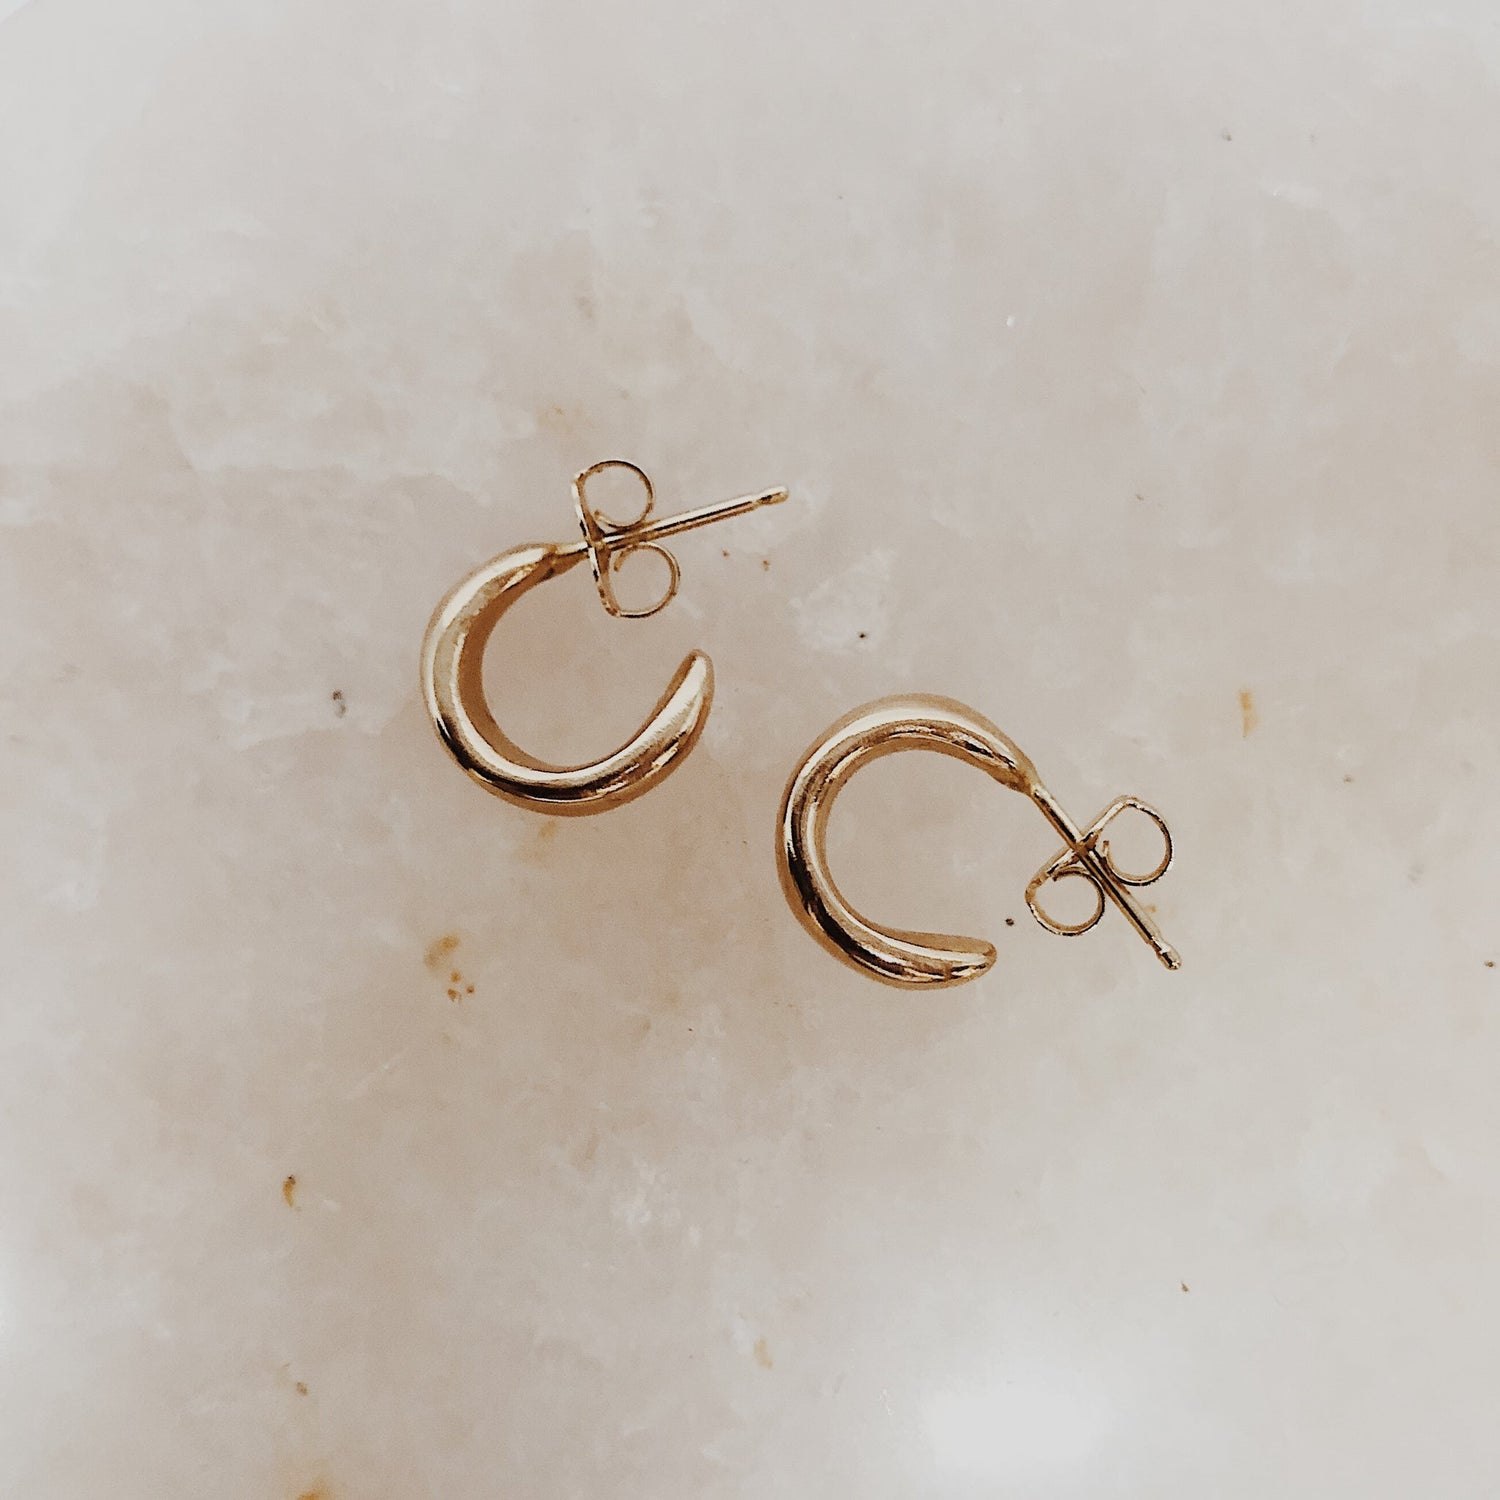 Organic and understated hoops with a luxurious feel.  The Cocoon Hoops hug the earlobe just perfectly.  Details:  hand cast in bronze or sterling silver 1 cm across sterling silver posts + backs